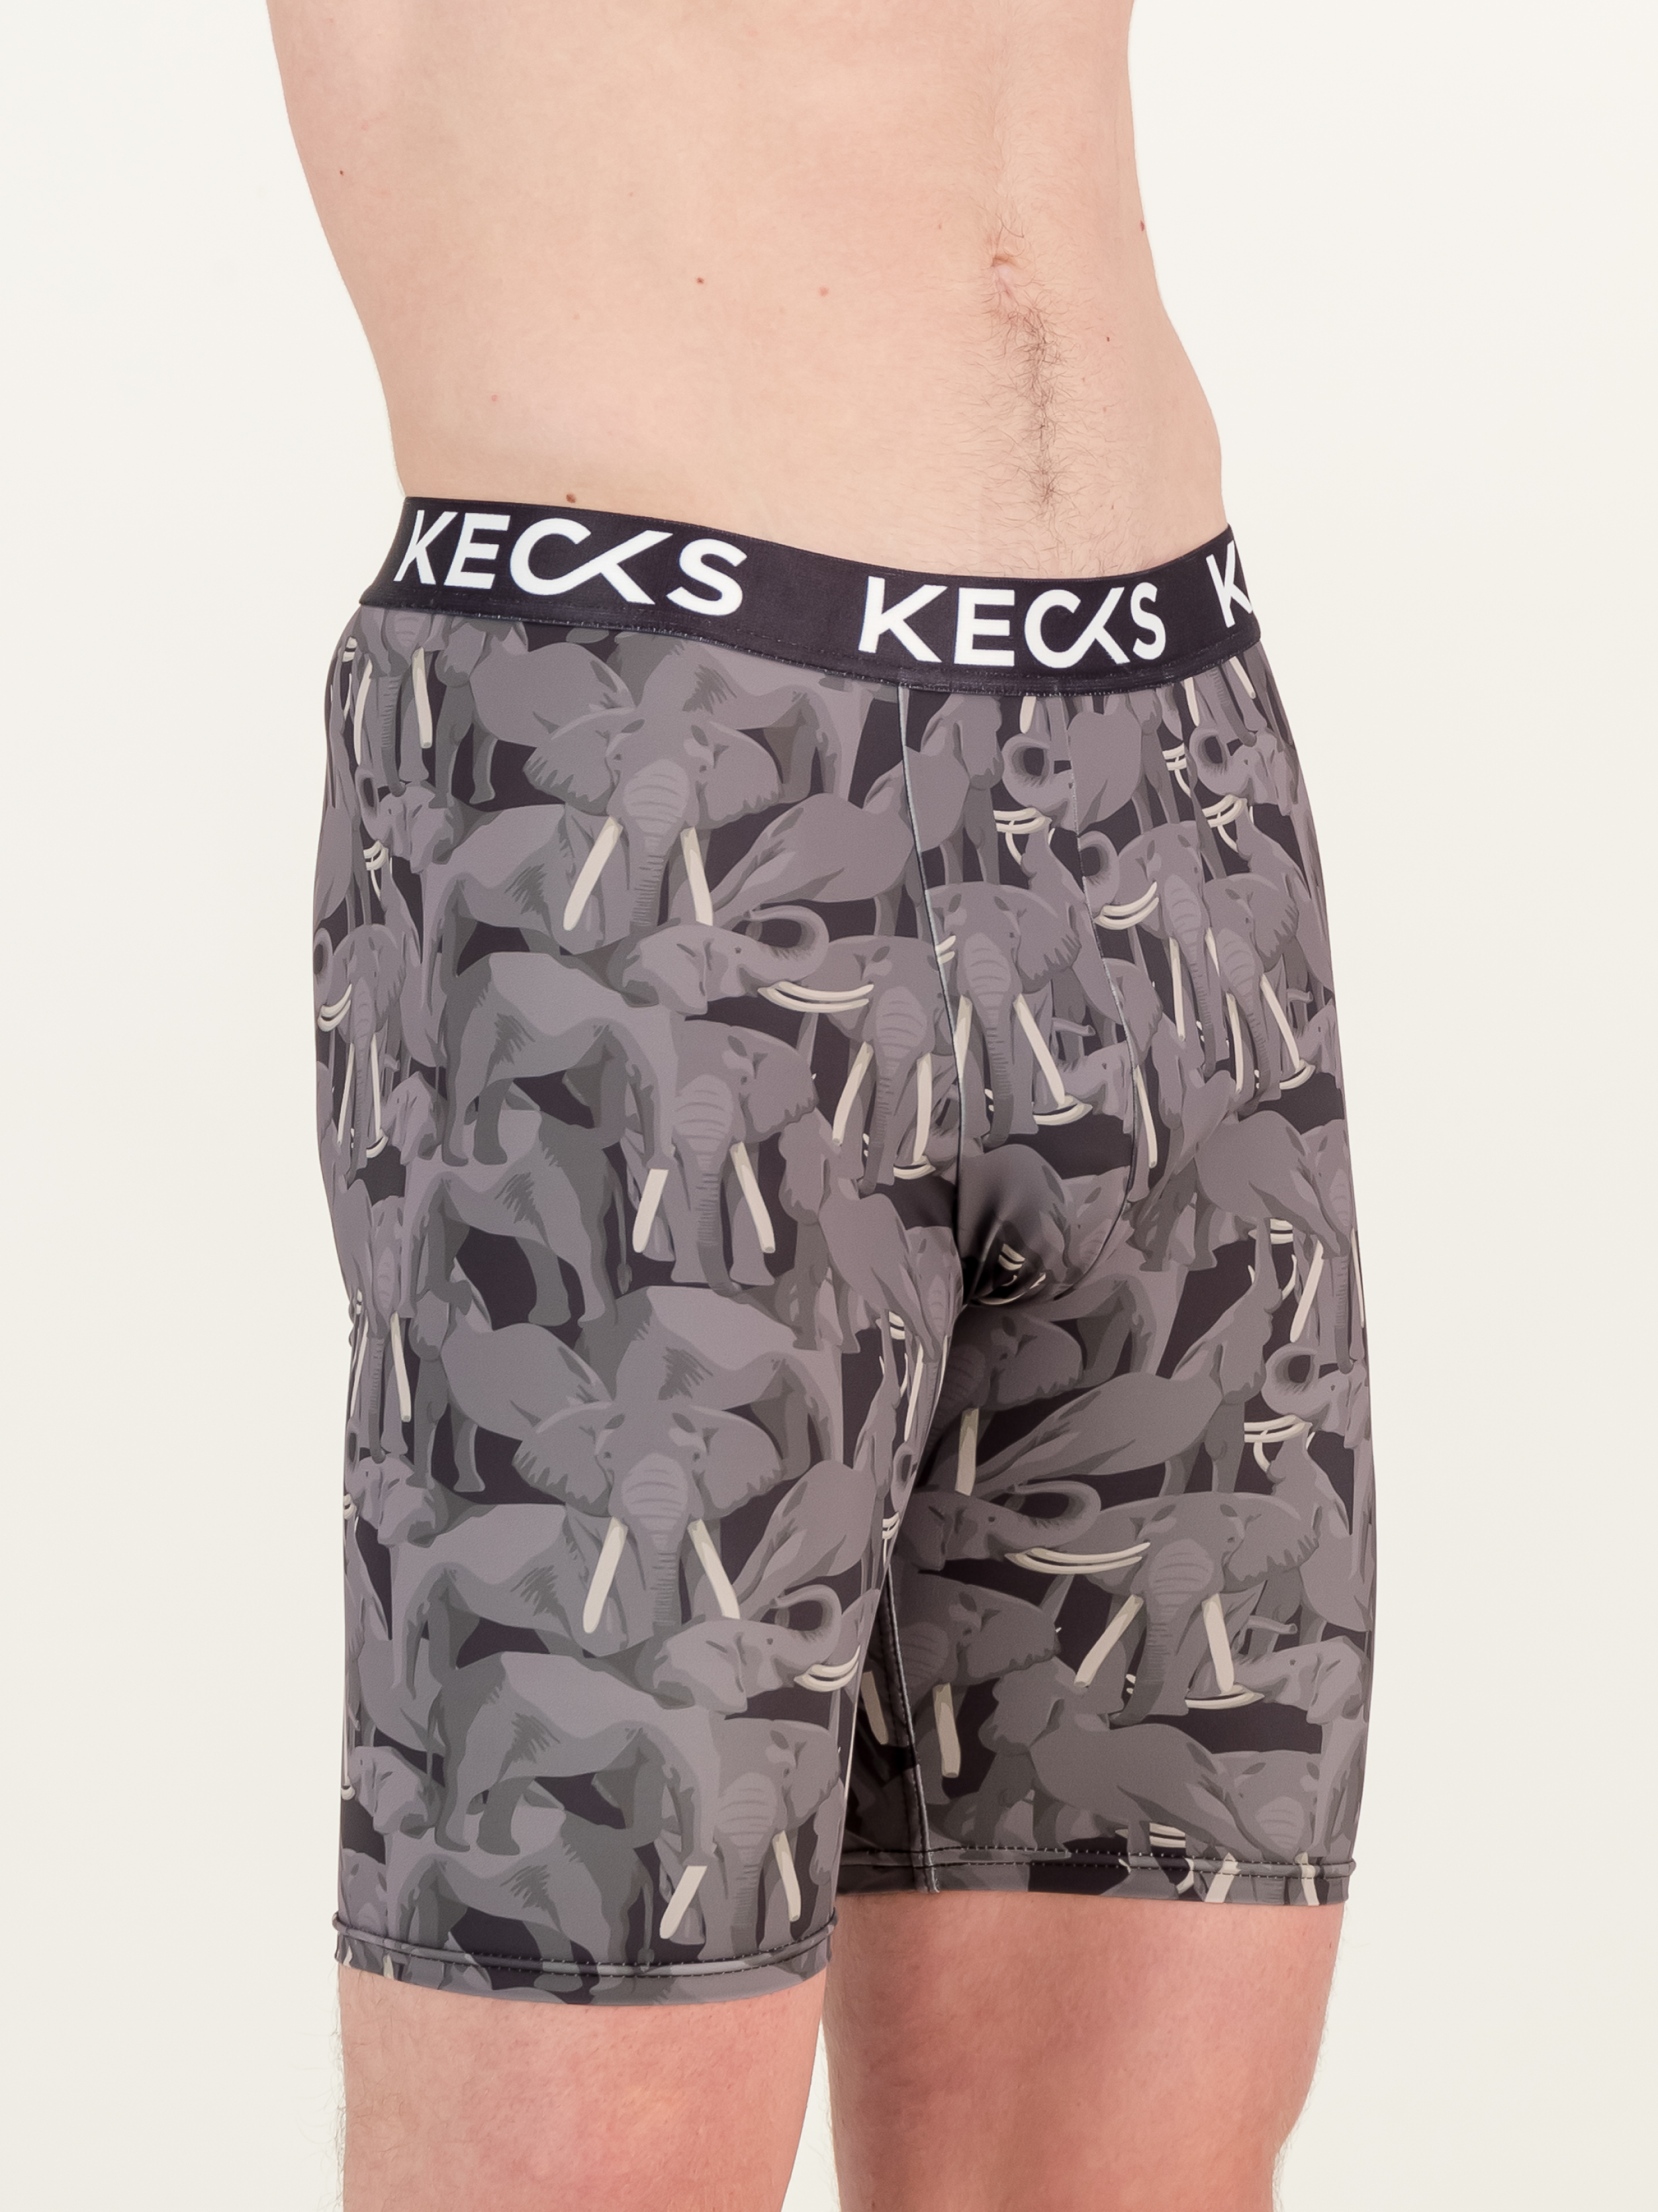 KECKS on Instagram: Comfortable and colourful underwear made for the  active South African lifestyle. Join the movement and experience the  comfort and style of our anti-chafe and quick-drying fabric. 🇿🇦☀️